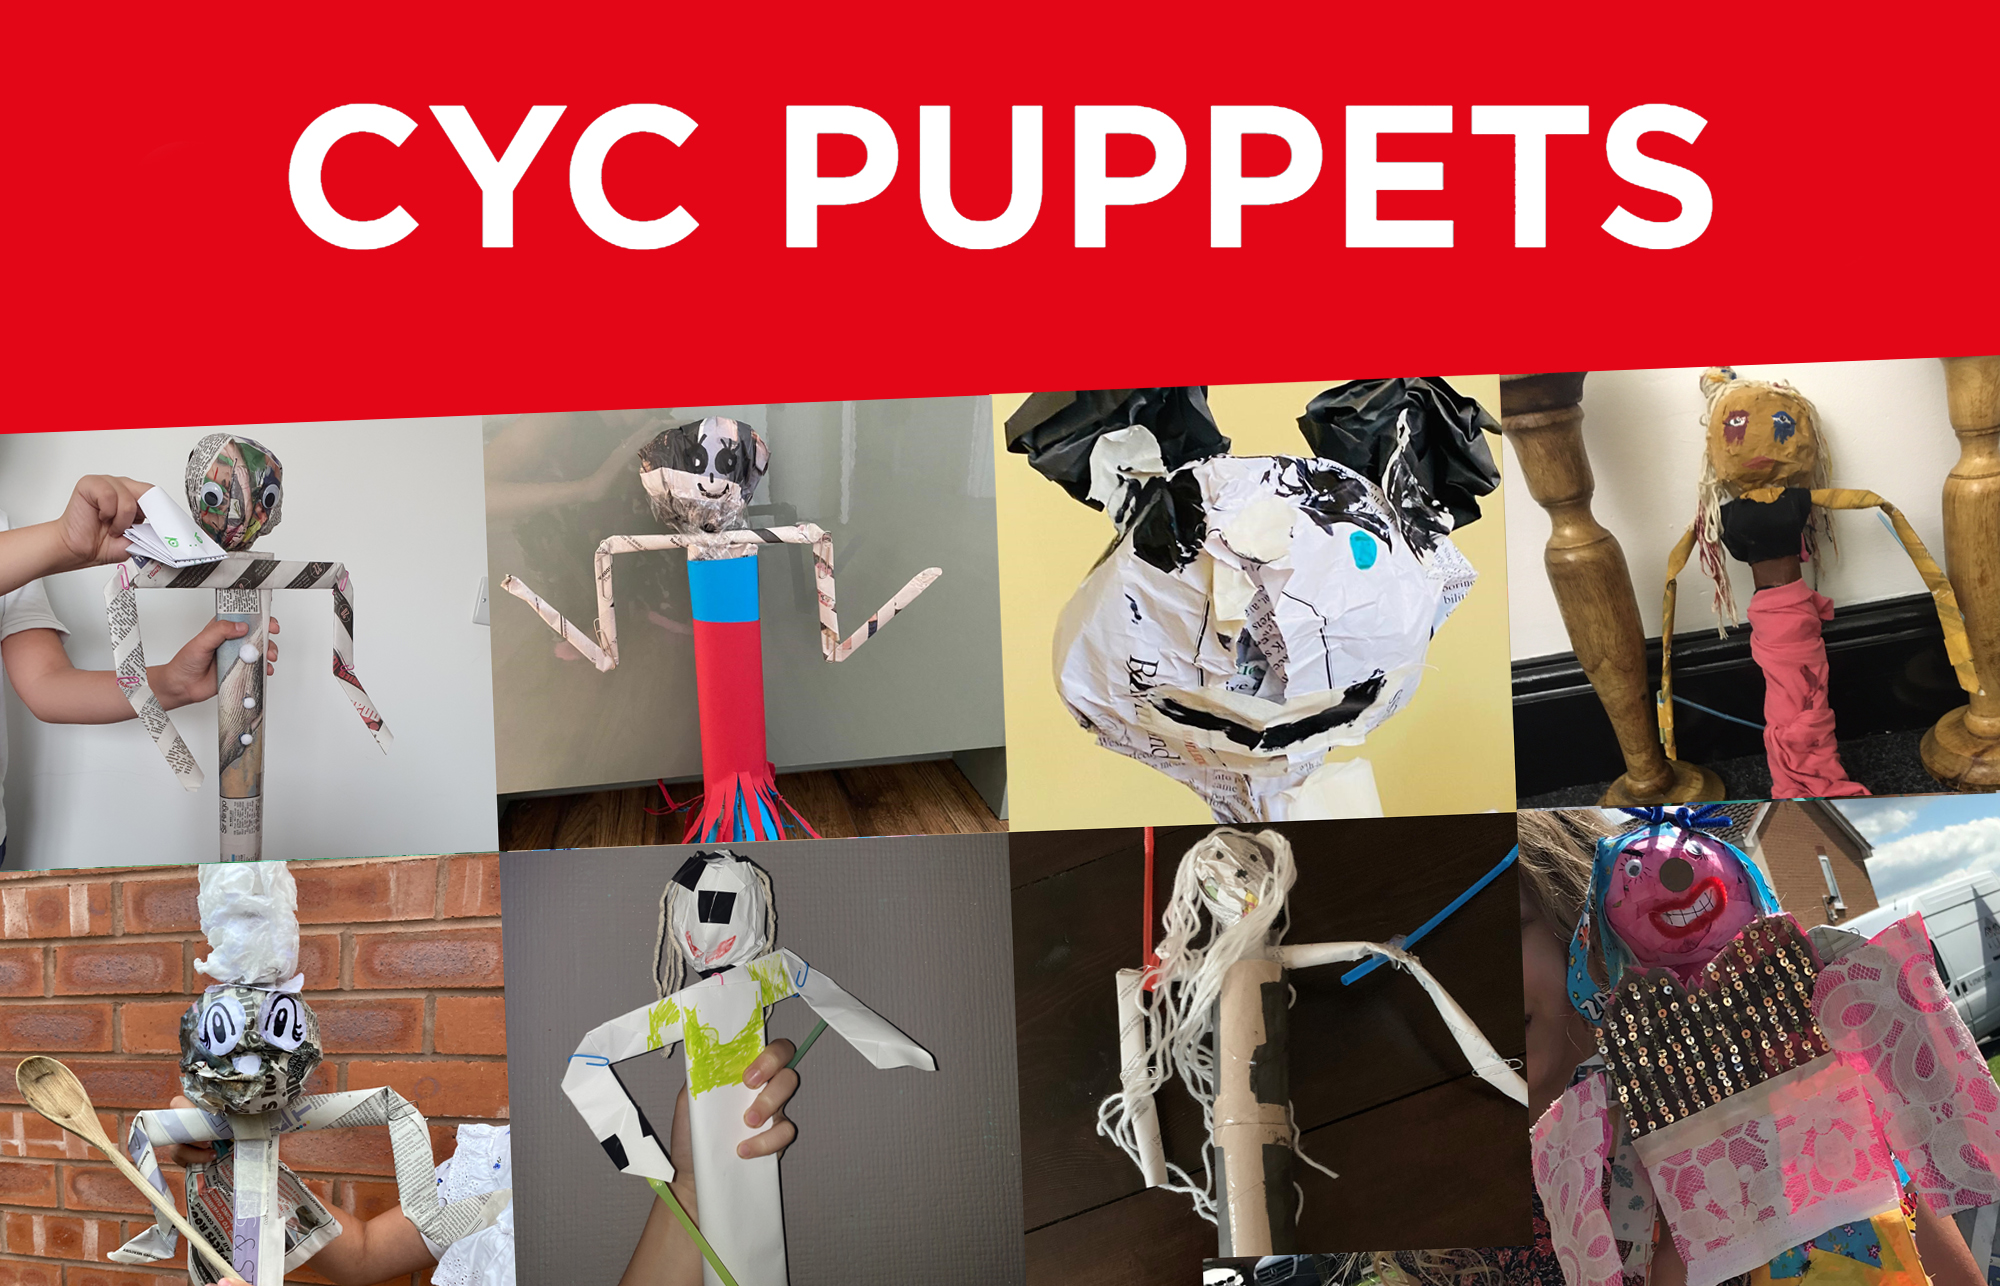 A collage of puppet designs from CYC Kids